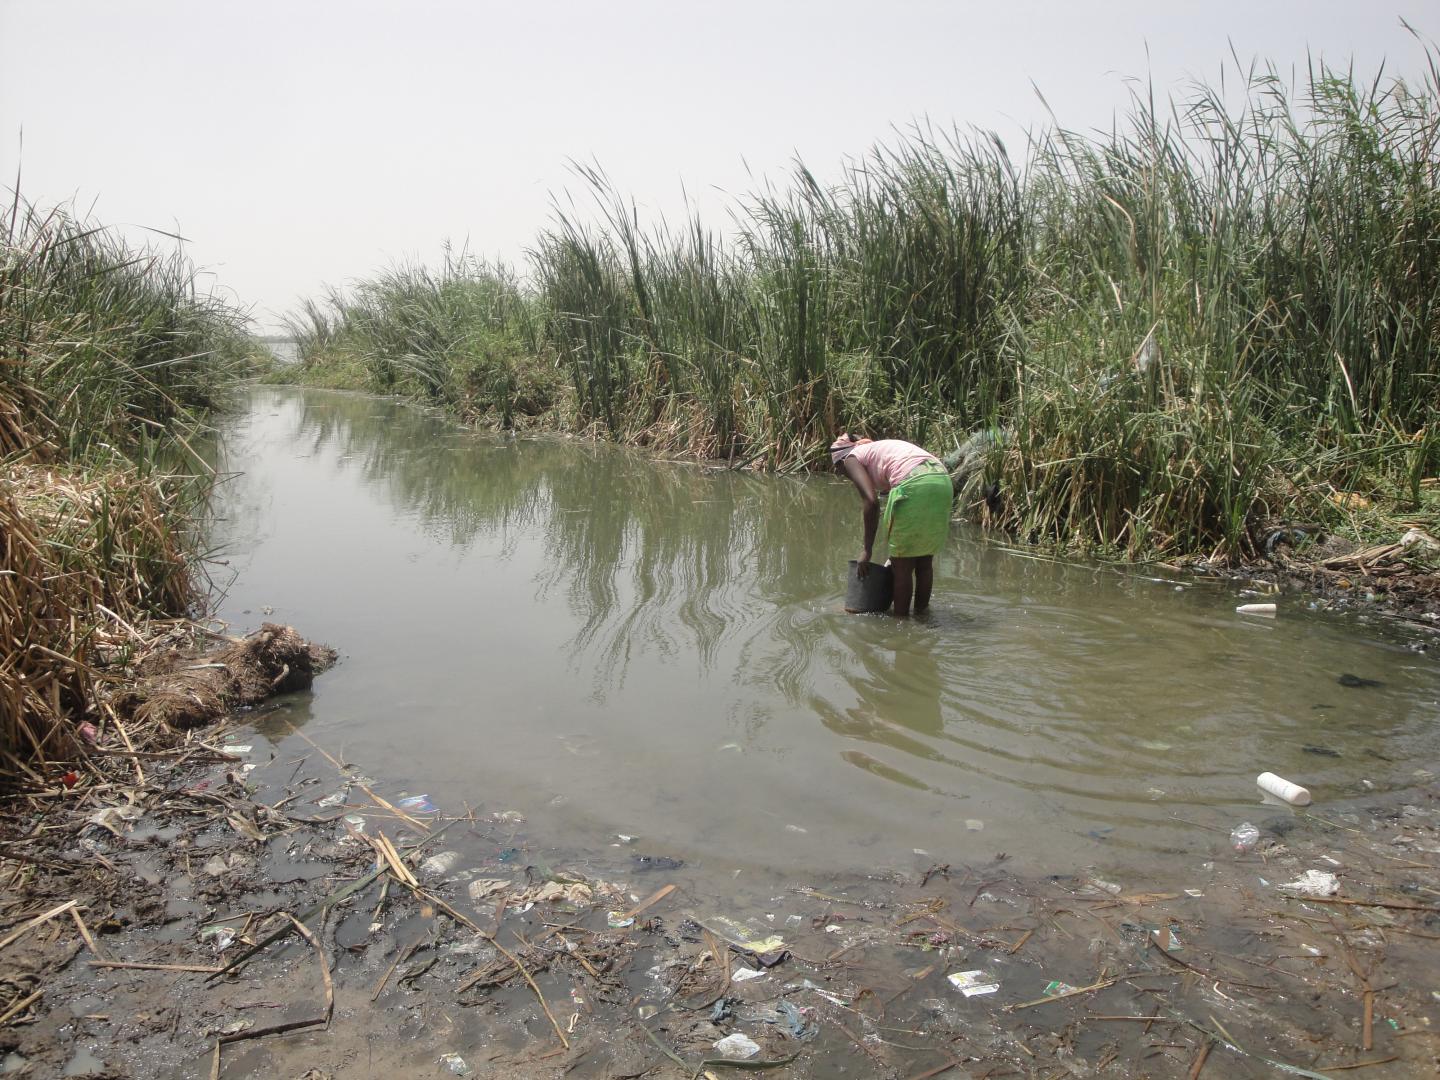 A Typical Village Water-Access Site on the Senegal River